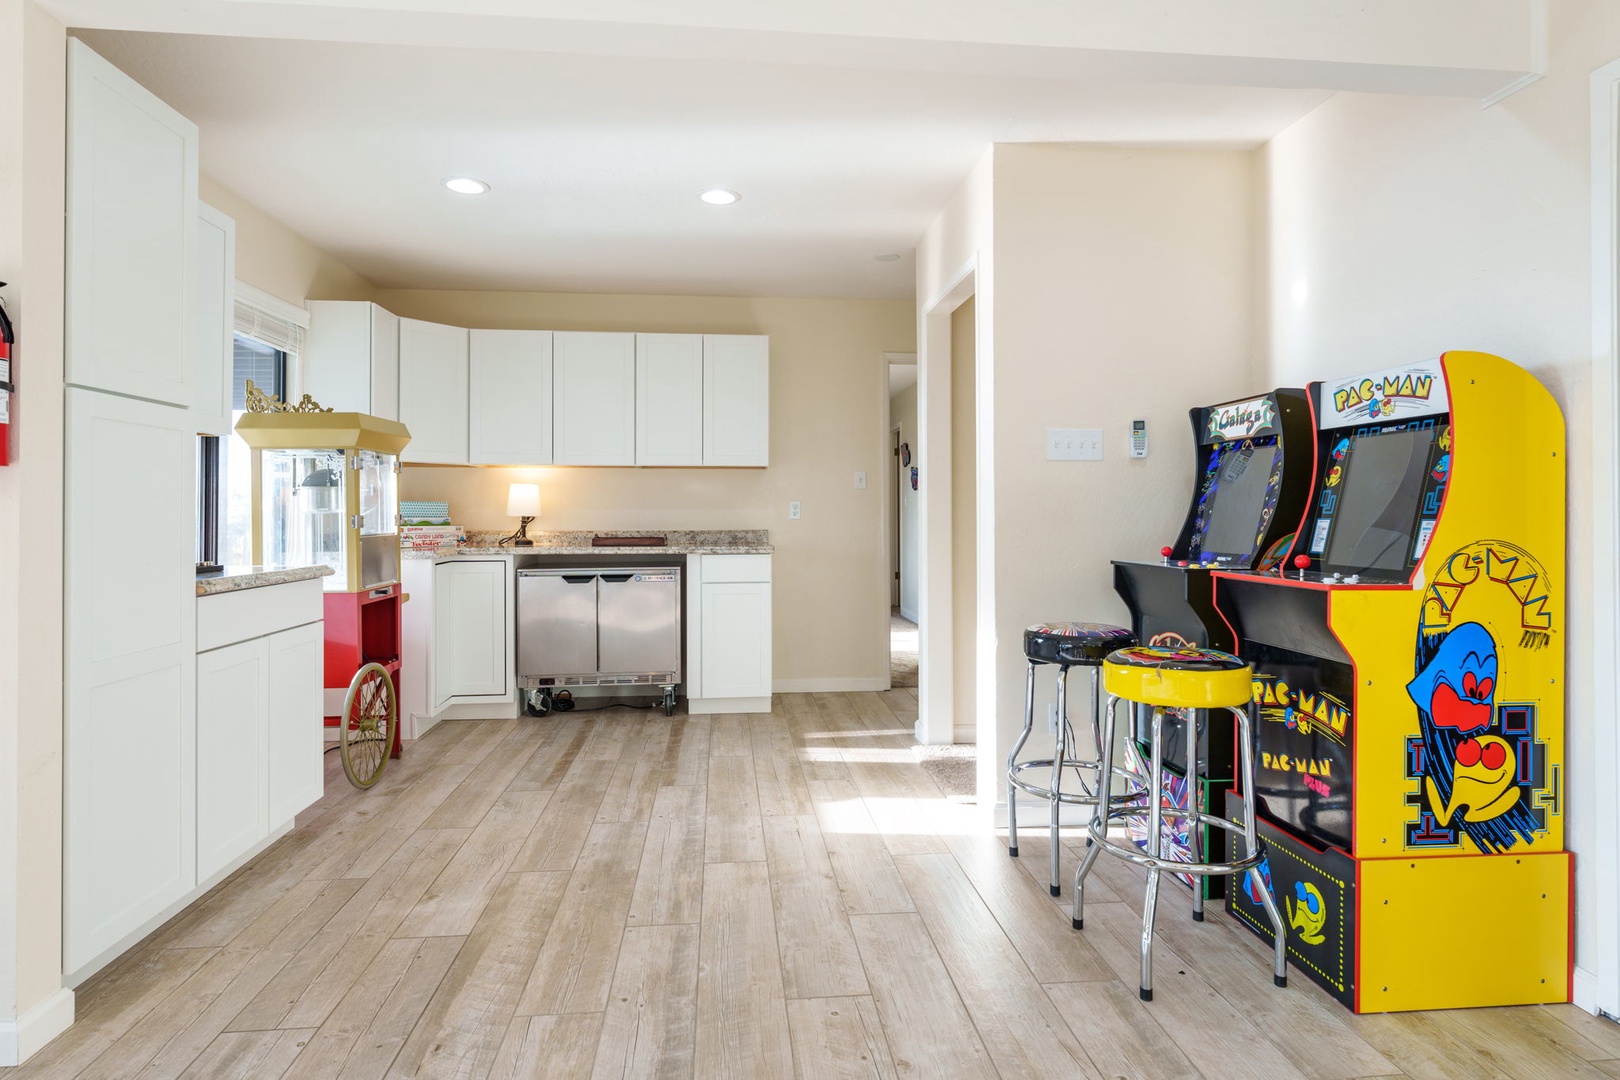 The Basement Game Room will be a family favorite with its Pool Table and other incredible amenities